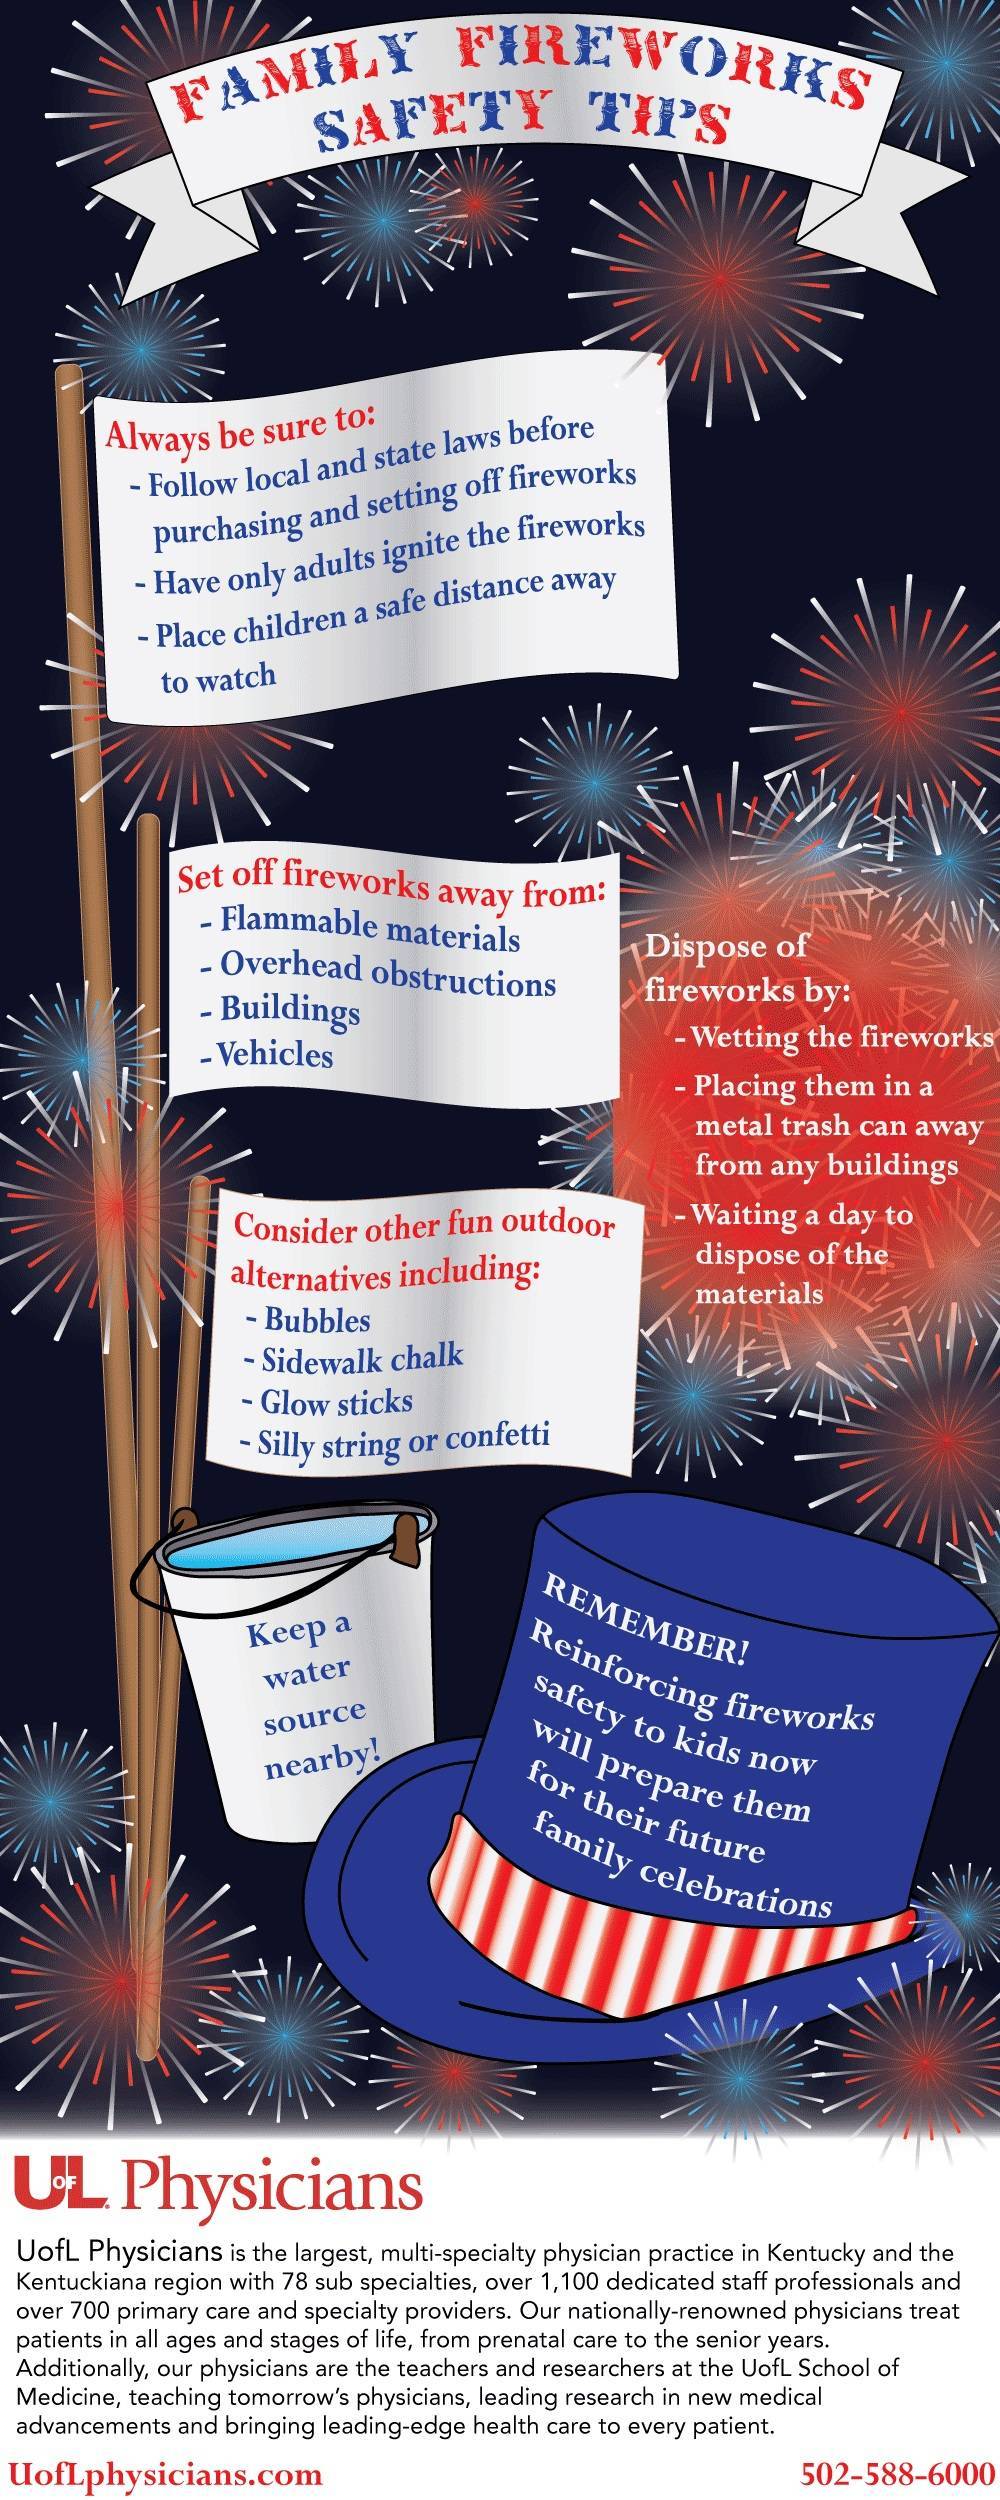 Fireworks safety infographic